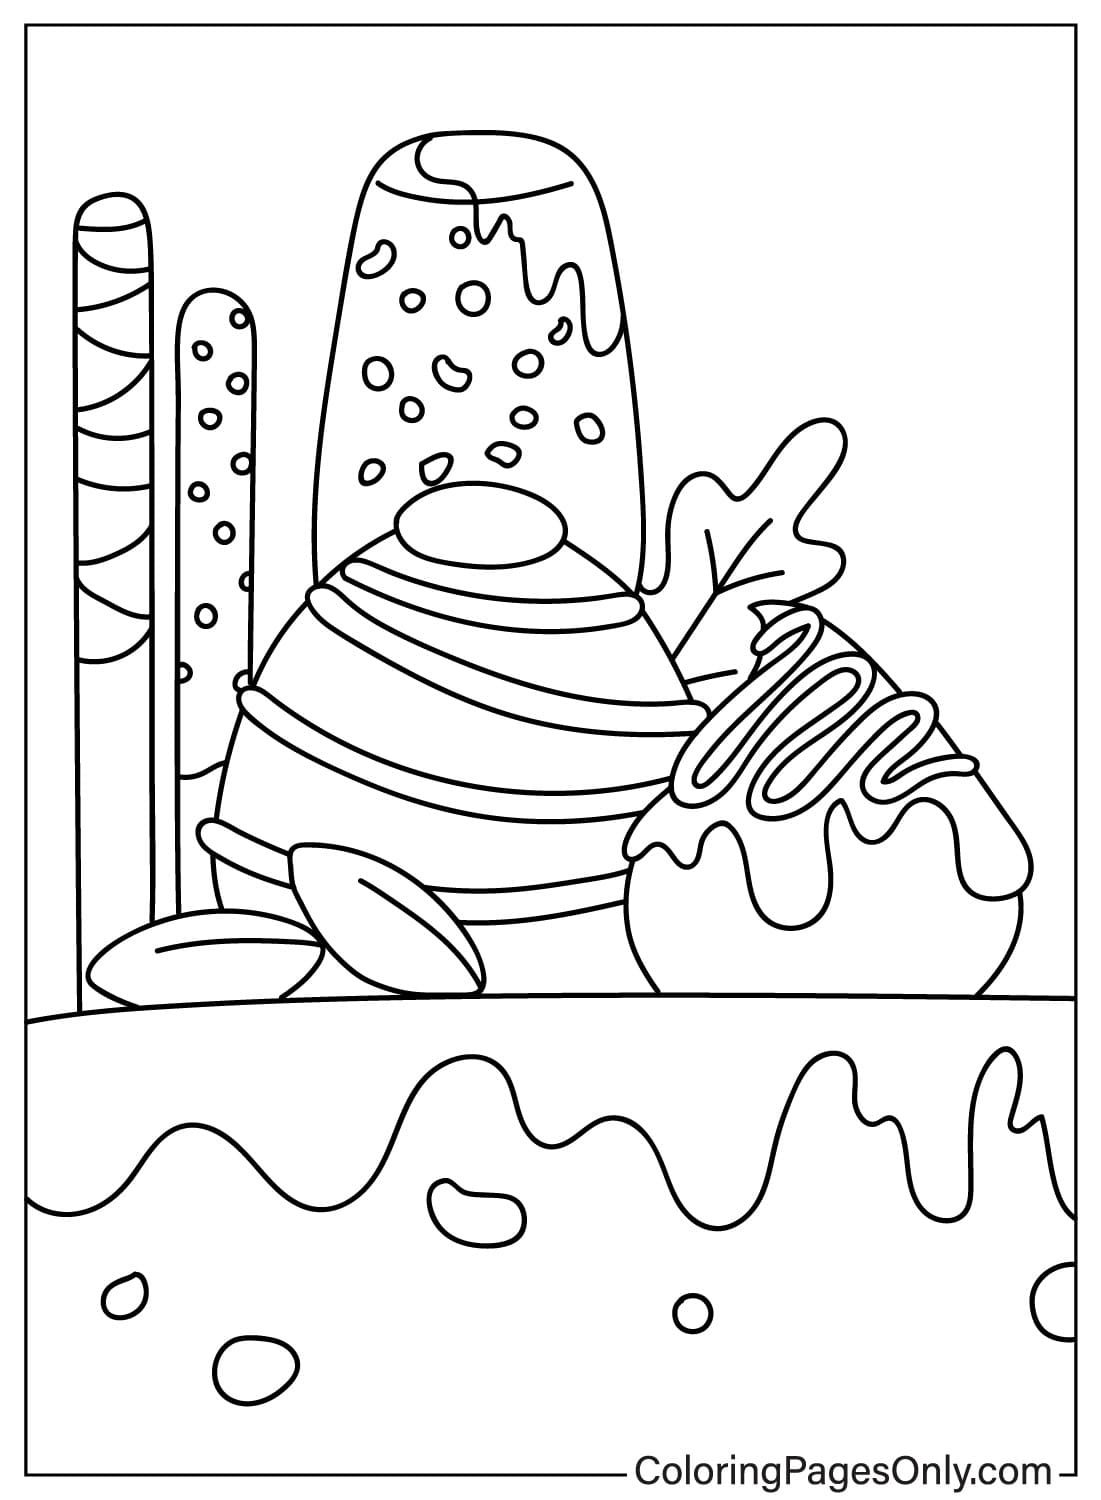 Drawing Chocolate Coloring Page from Chocolate